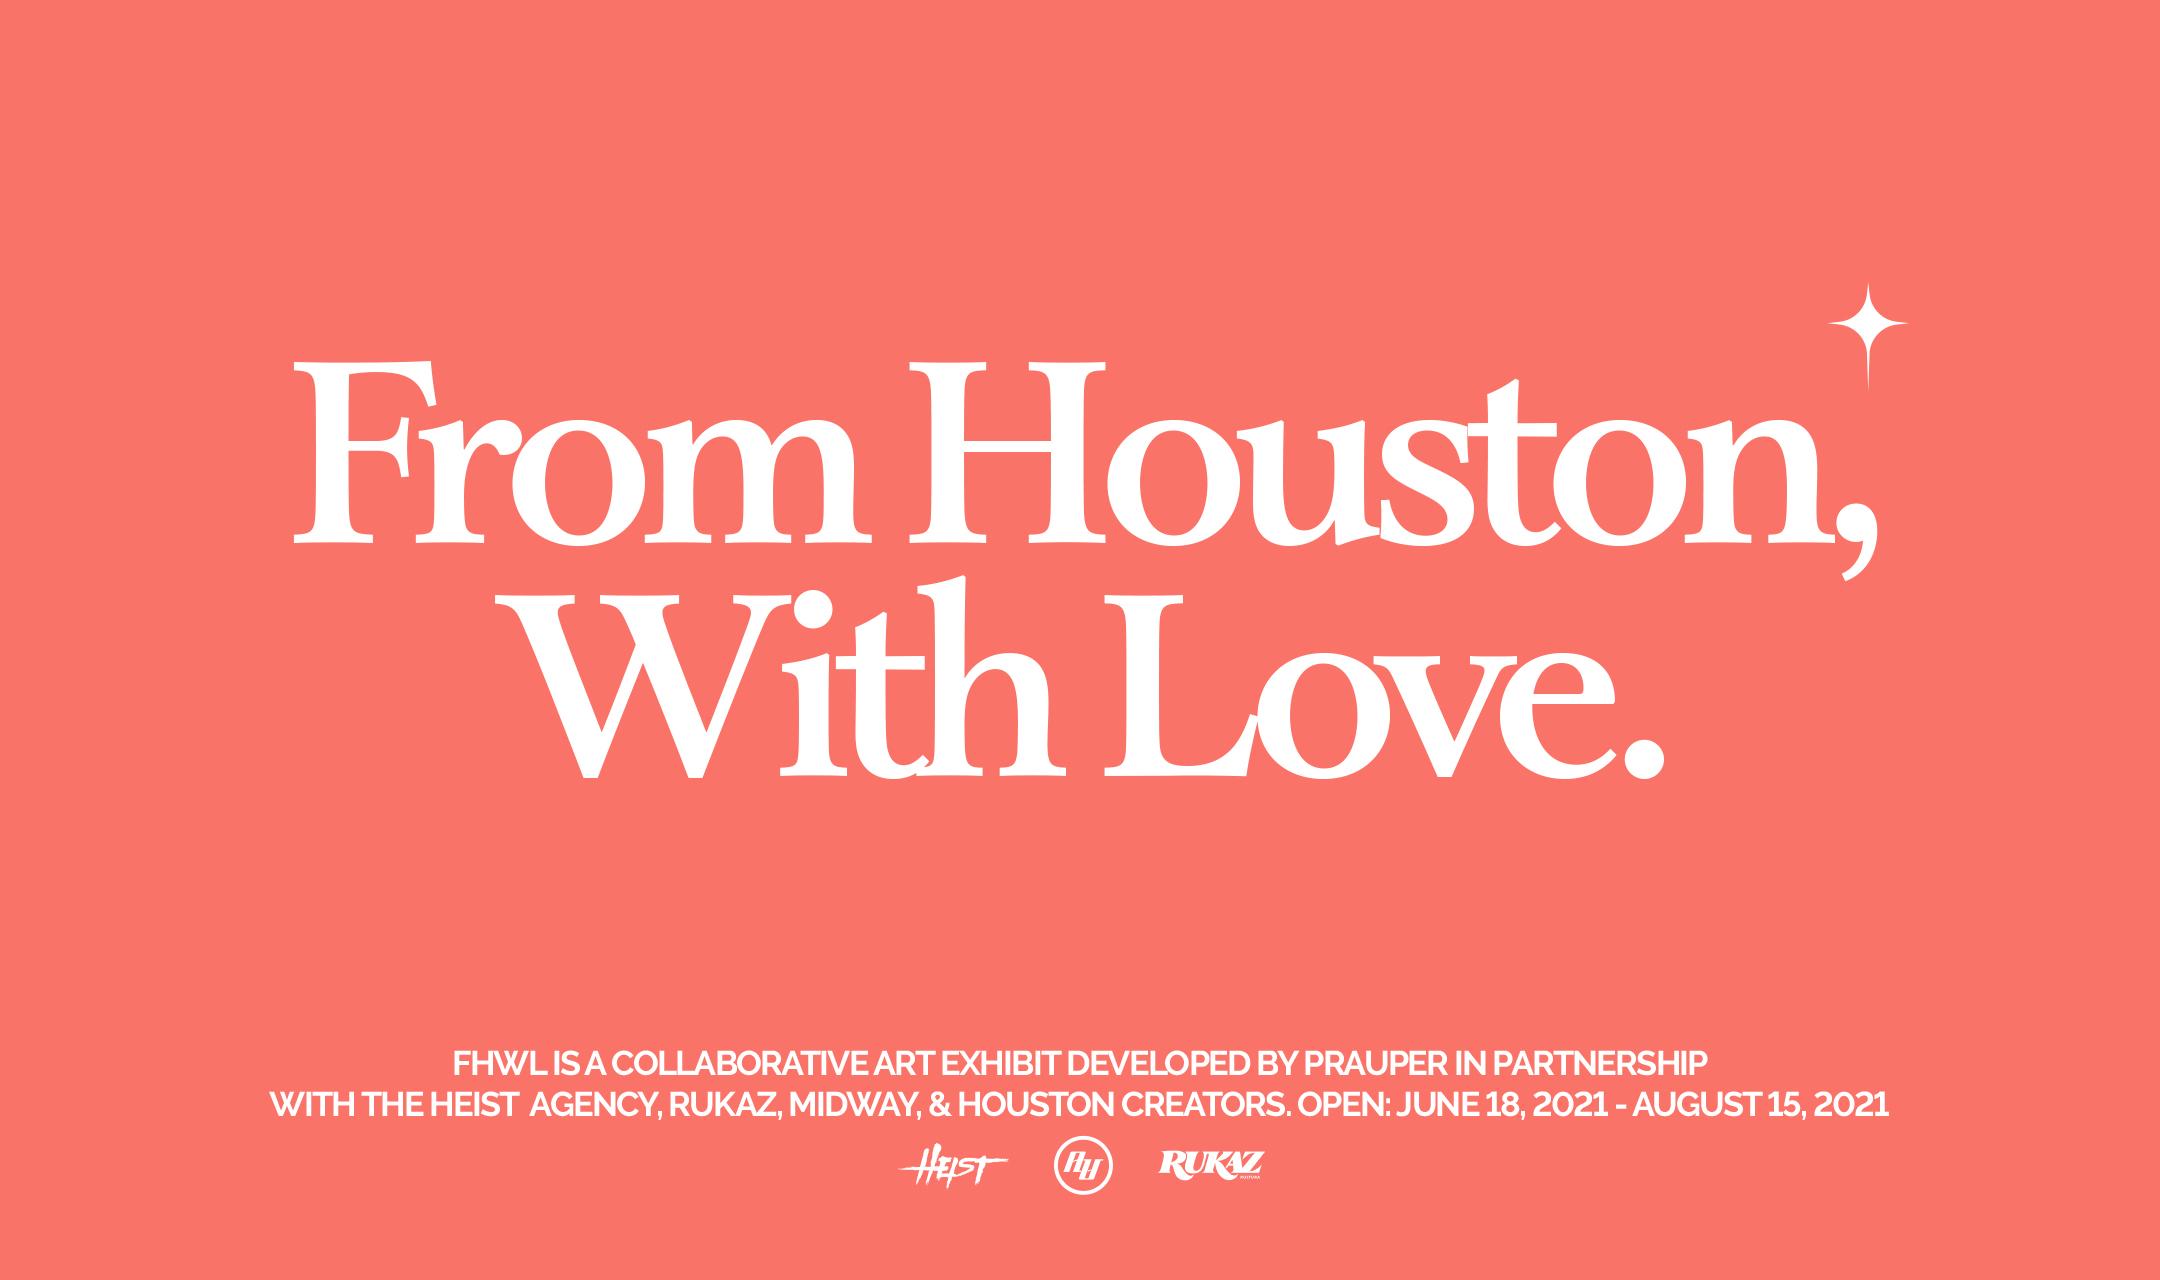 From Houston, With Love.